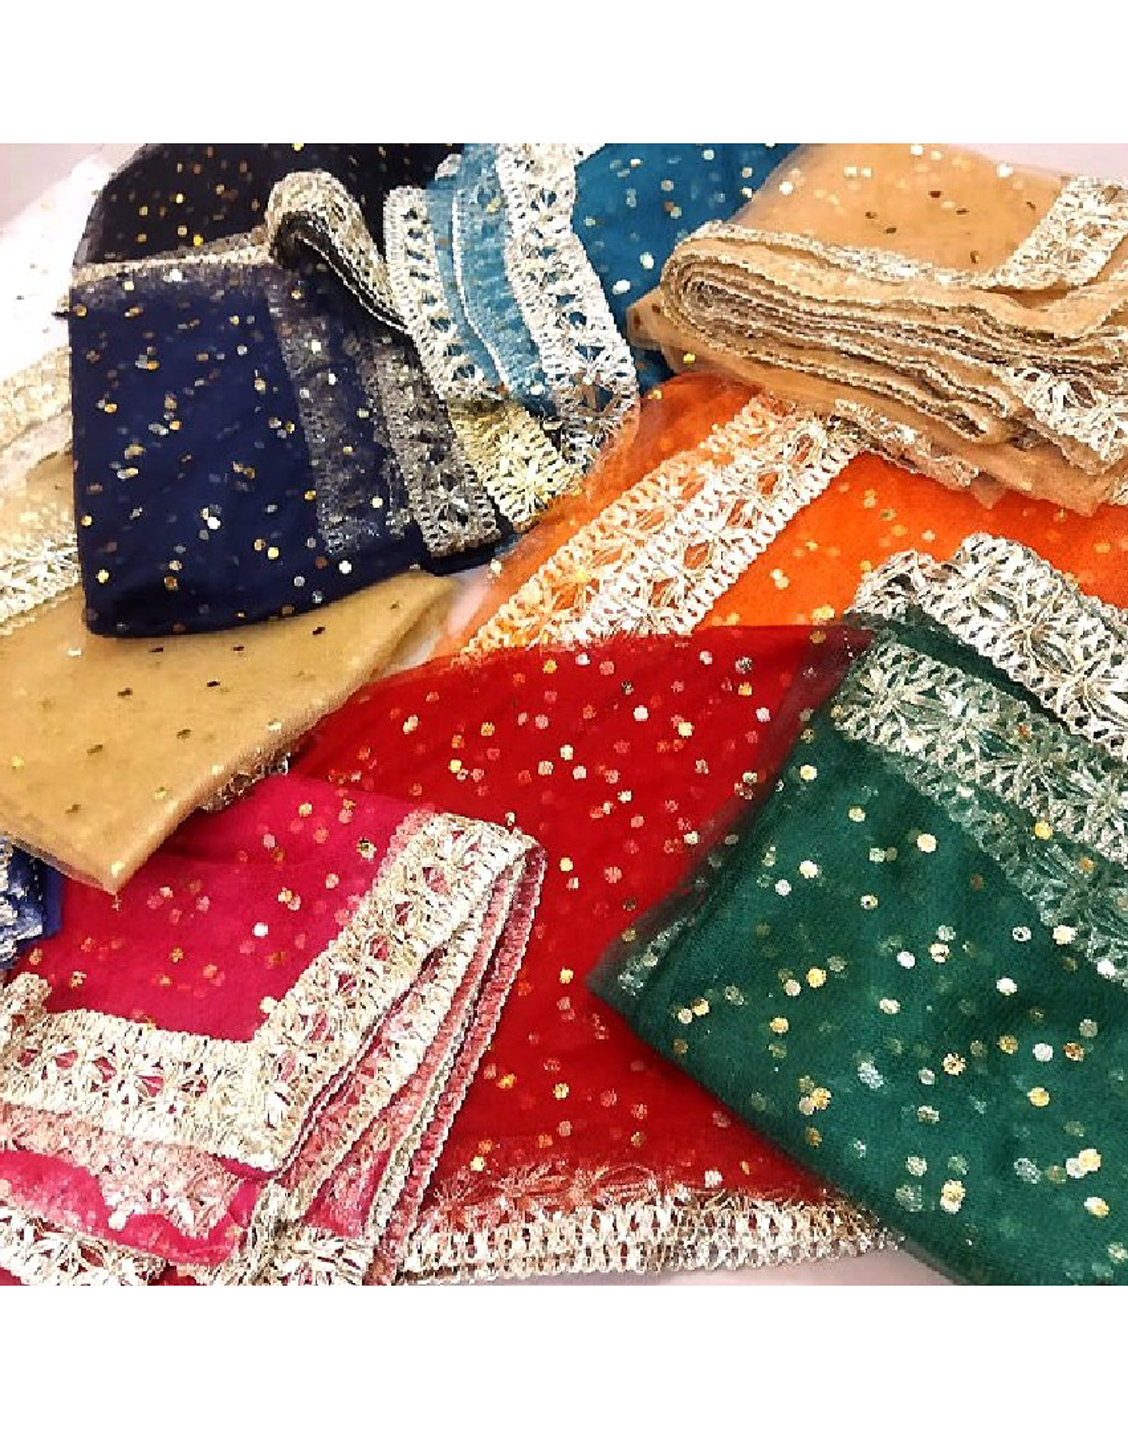 Gota Lace Net Dupatta of Your Color Choice Price in Pakistan (M014996 ...